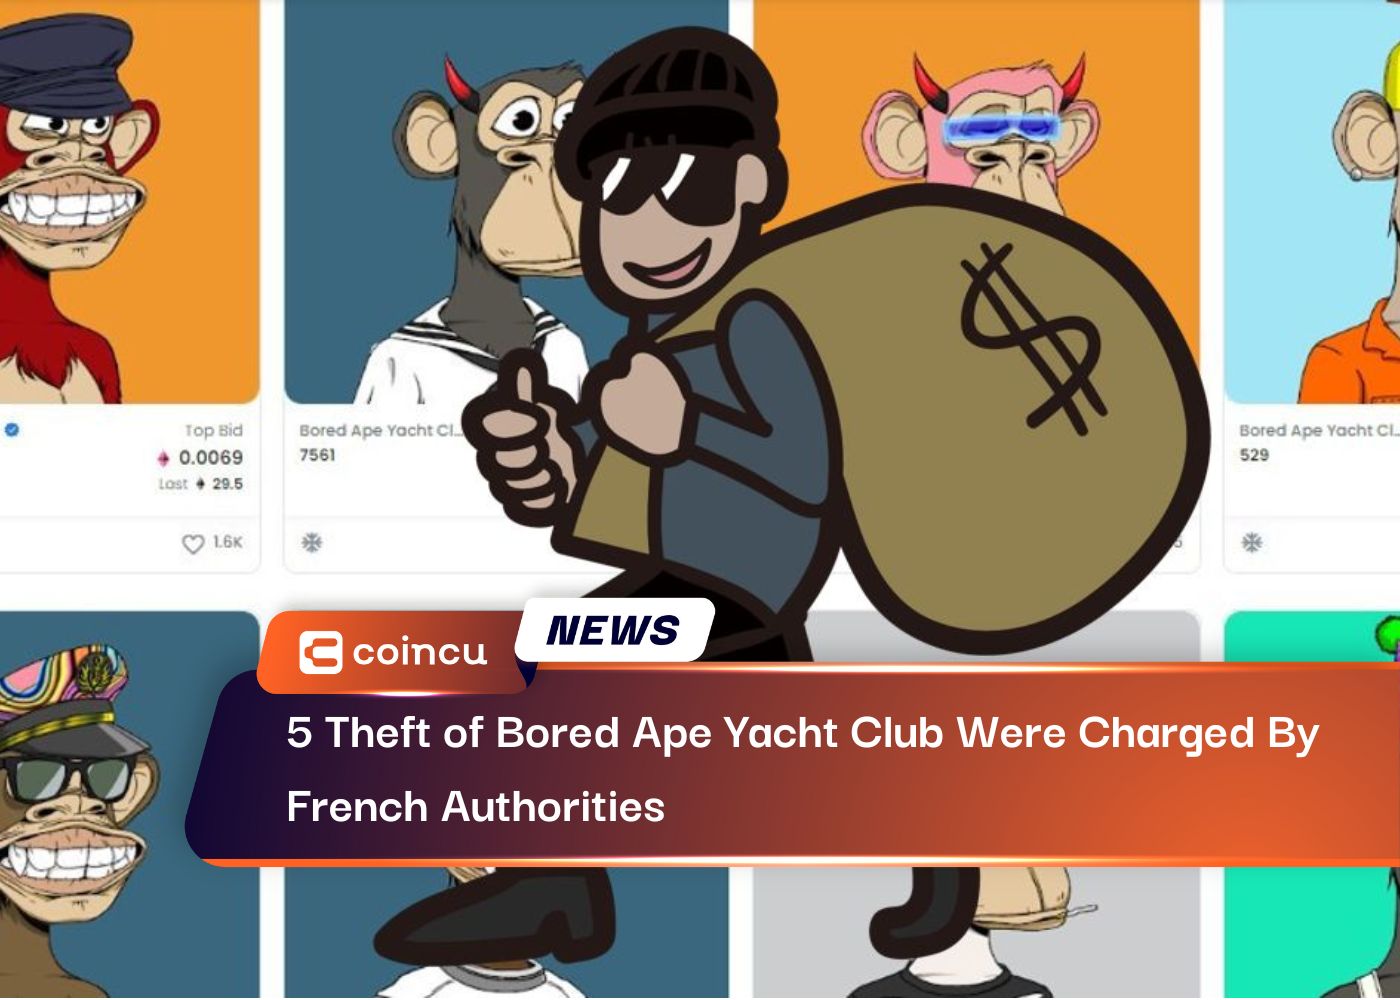 5 Theft of Bored Ape Yacht Club Were Charged By French Authorities